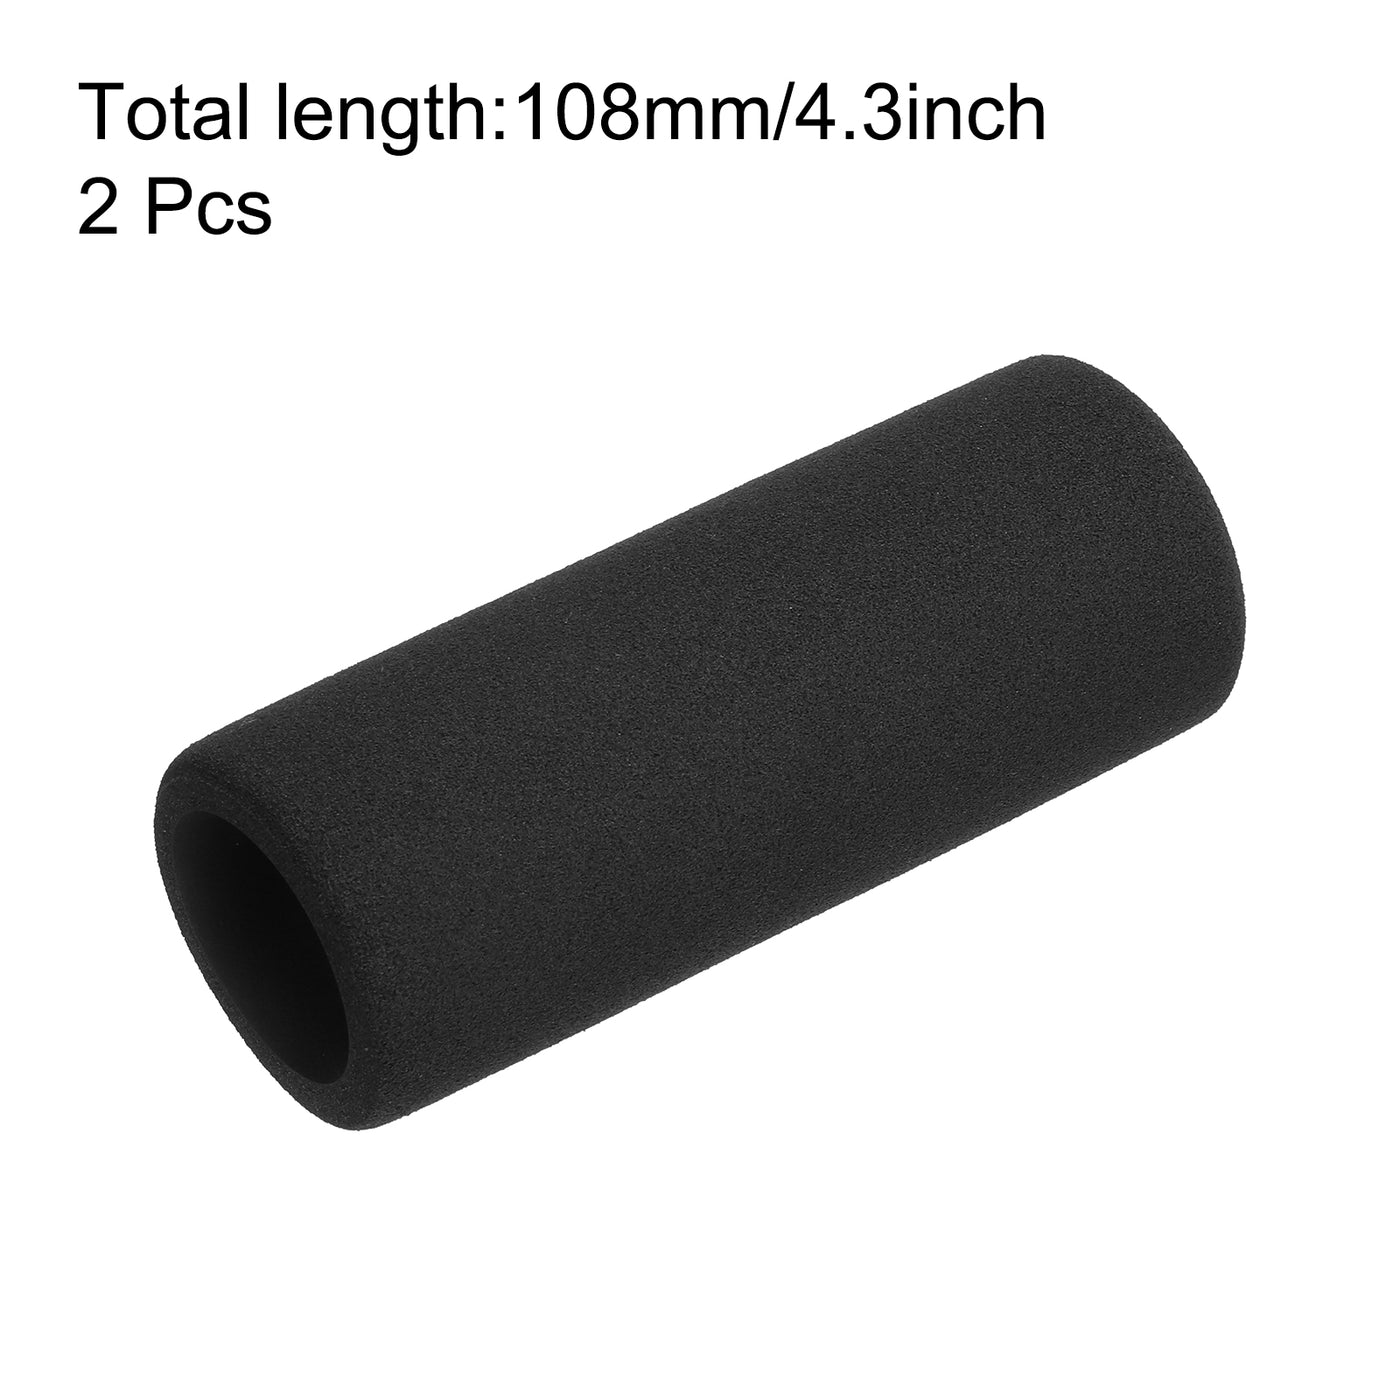 uxcell Uxcell Pipe Insulation Tube Foam Tubing for Handle Grip Support 32mm ID 44mm OD 108mm Heat Preservation Black 2pcs